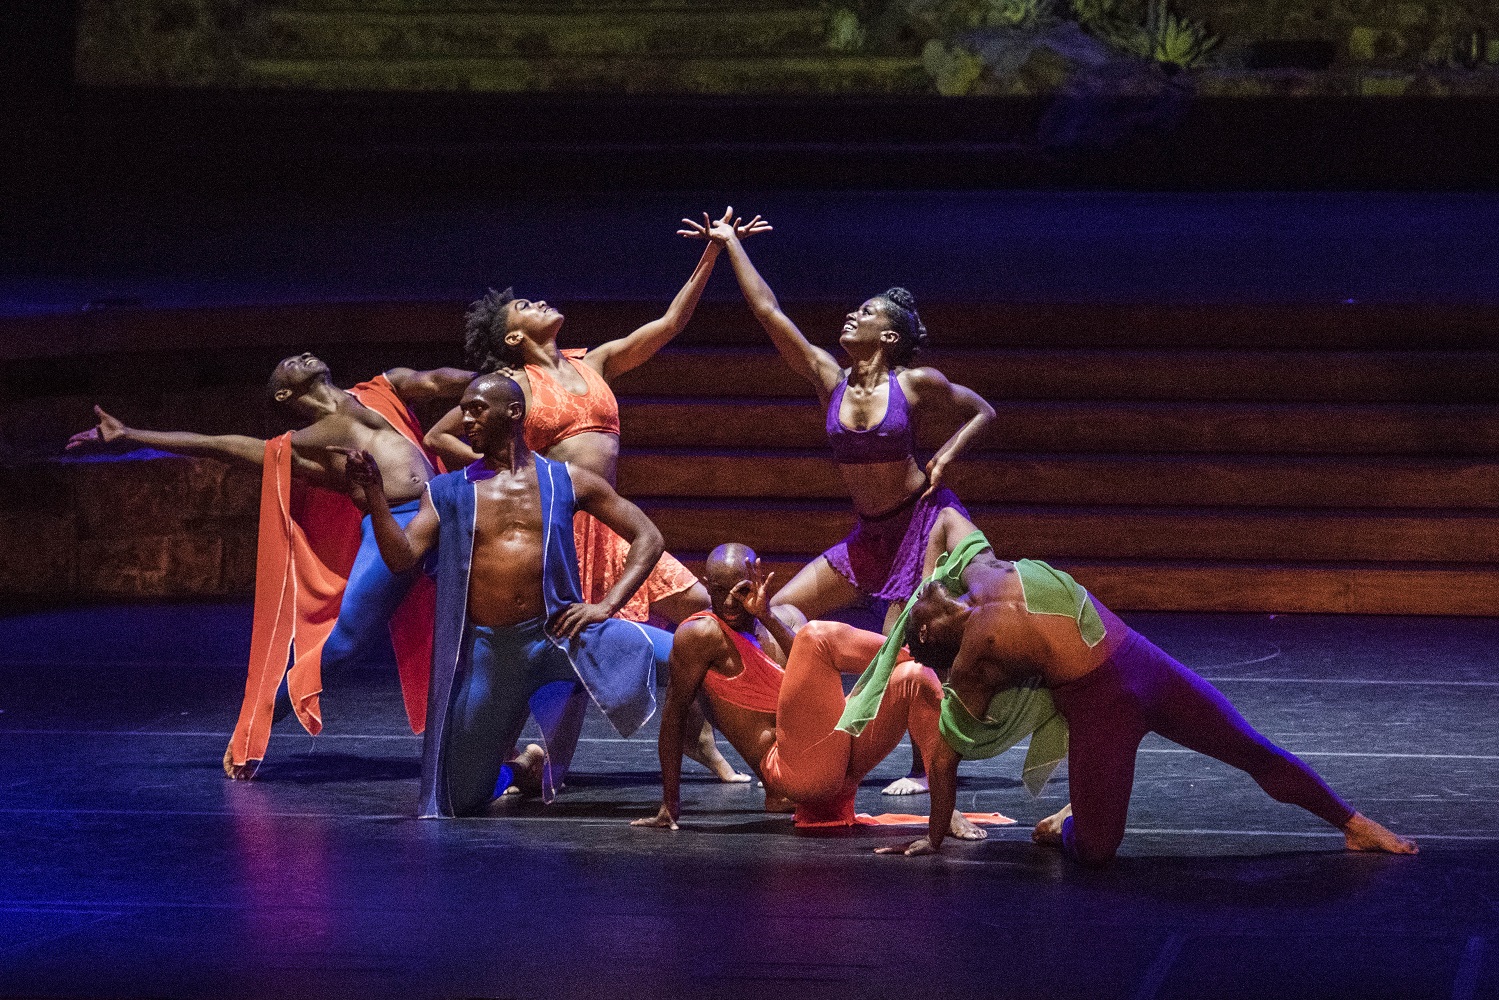 "Ignite at The Ford" - Lula Washington Dance Theatre - Photo courtesy of The Ford Theatres.